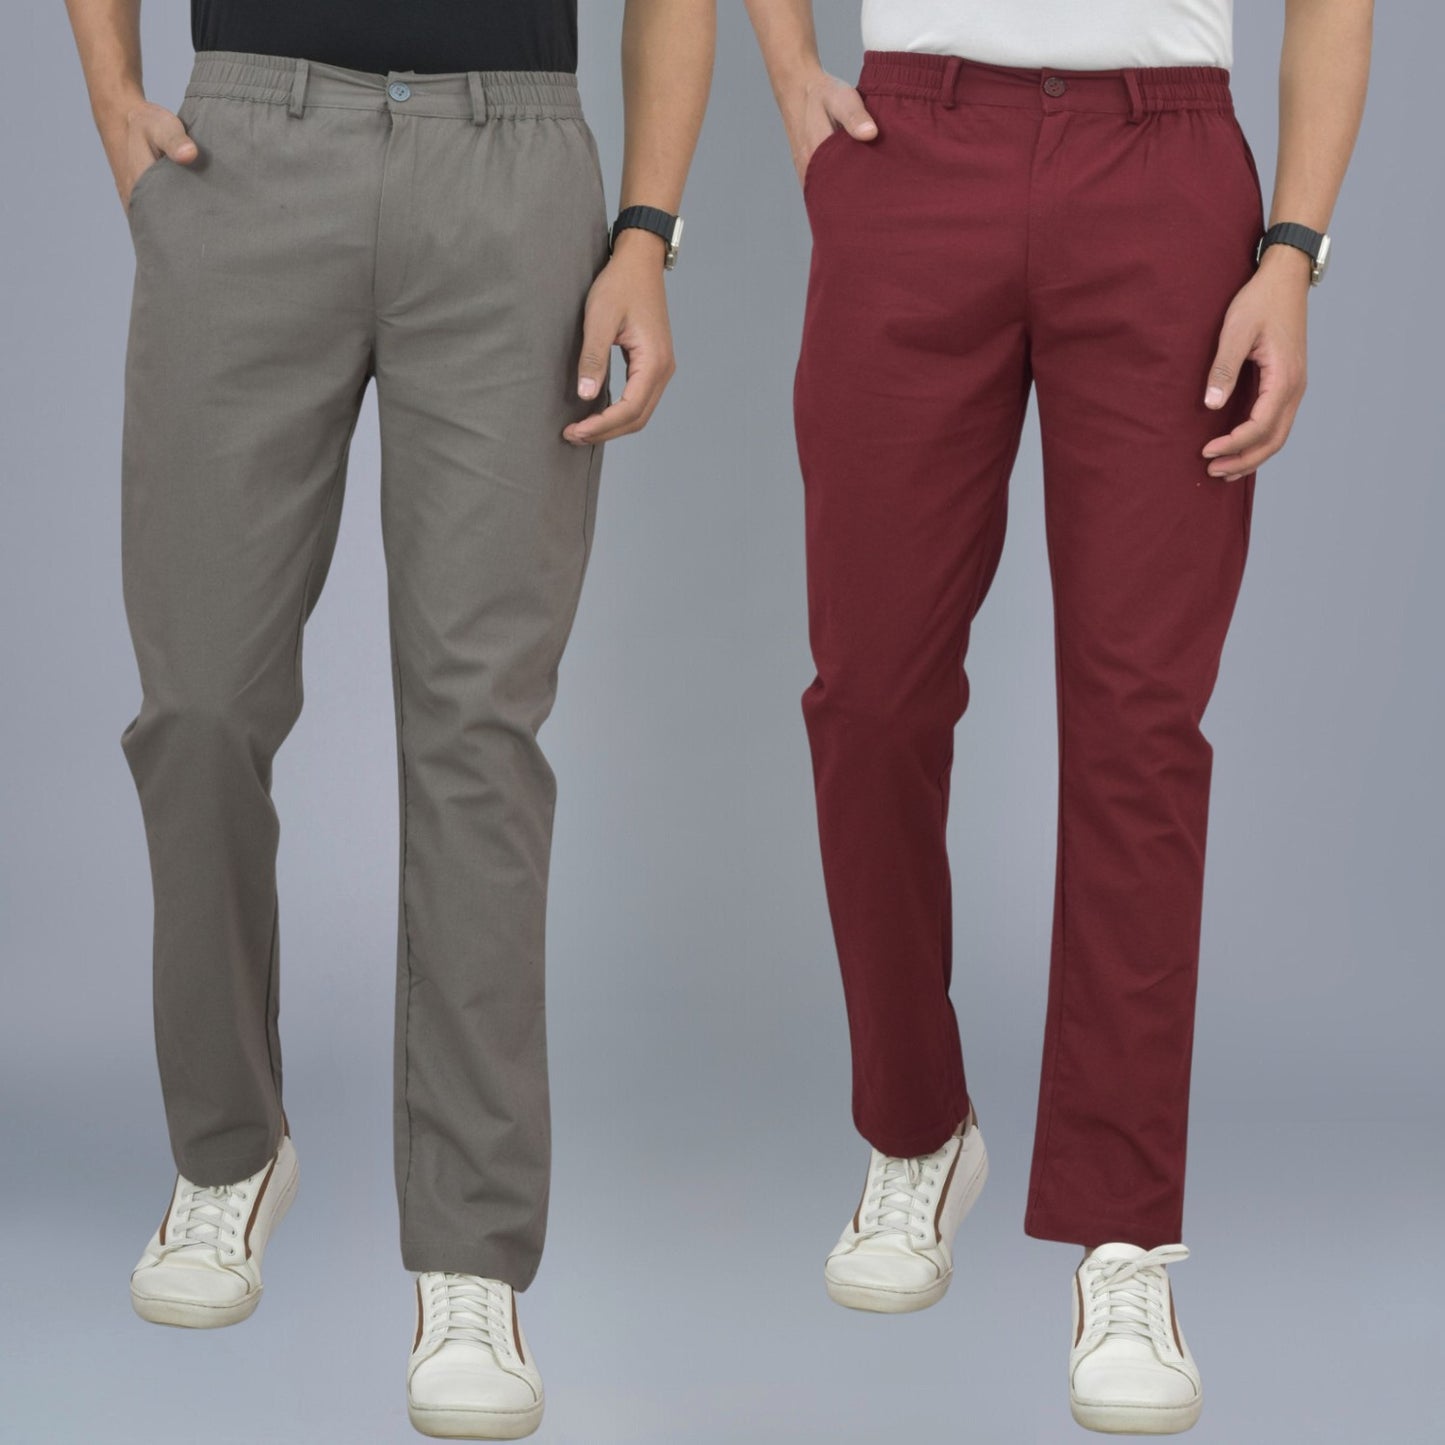 Pack Of 2 Grey And Wine Airy Linen Summer Cool Cotton Comfort Pants For Men